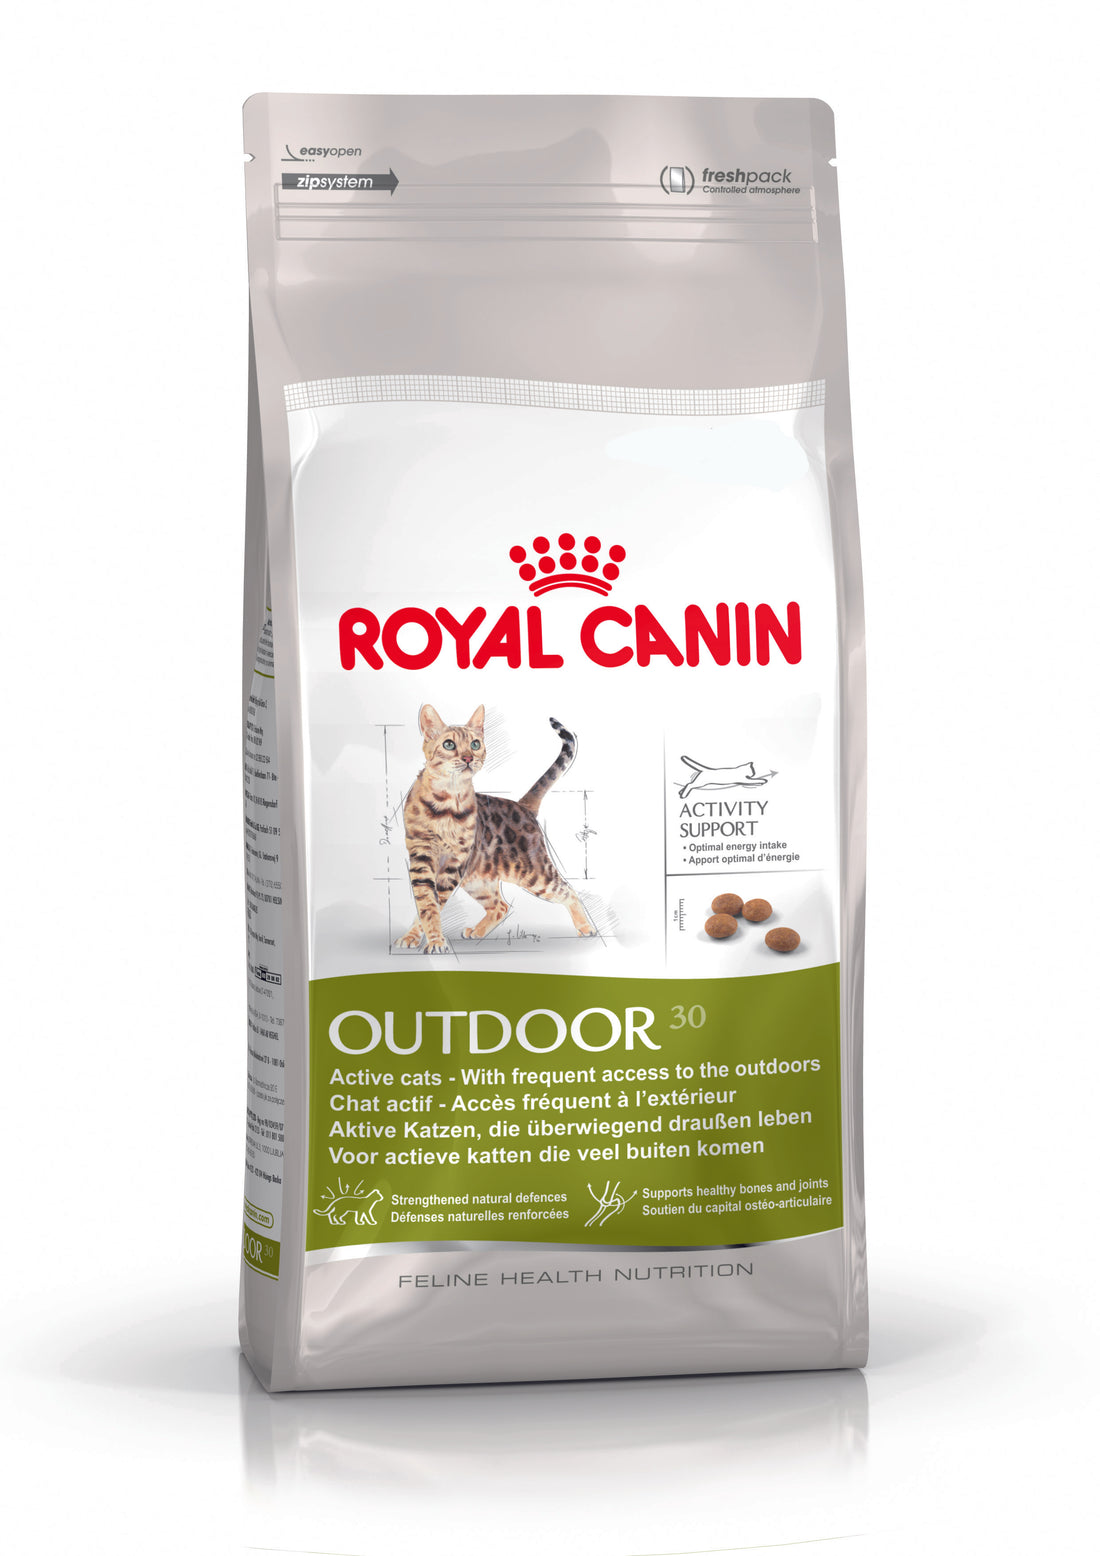 Royal Canin-Outdoor 30 Cat Food 2Kg